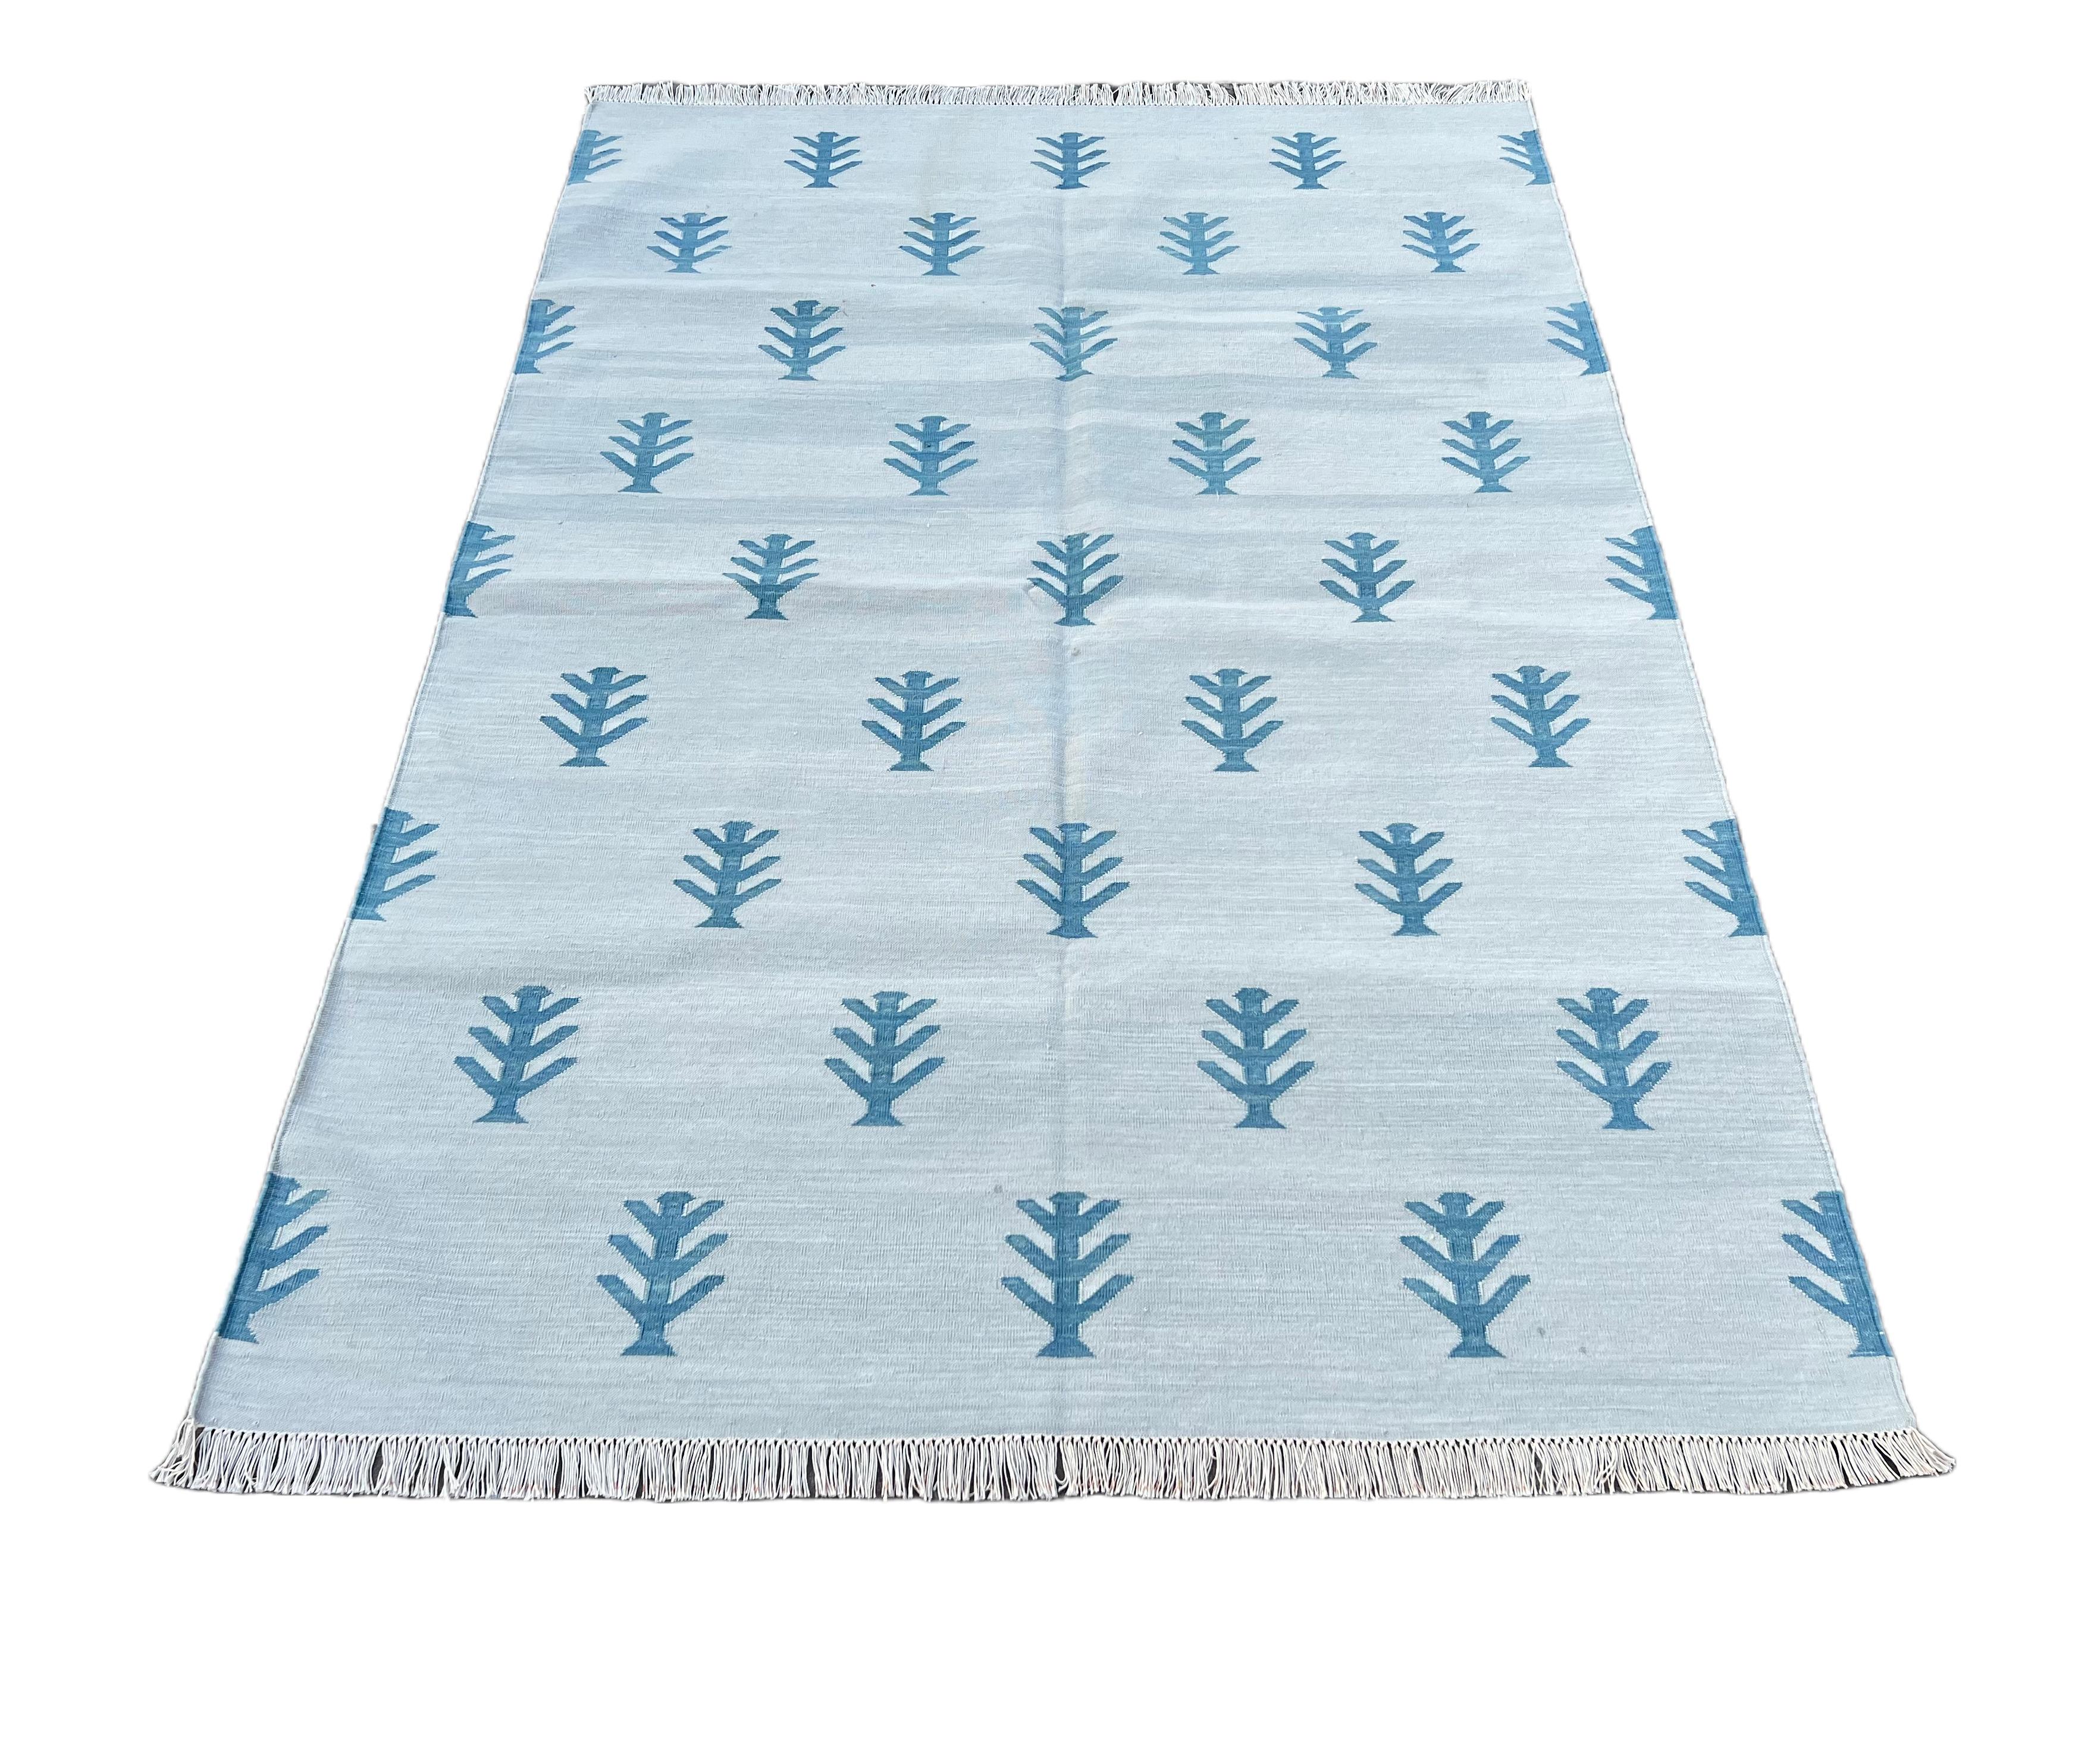 Handmade Cotton Area Flat Weave Rug, 4x6 Grey, Blue Tree Pattern Indian Dhurrie For Sale 3